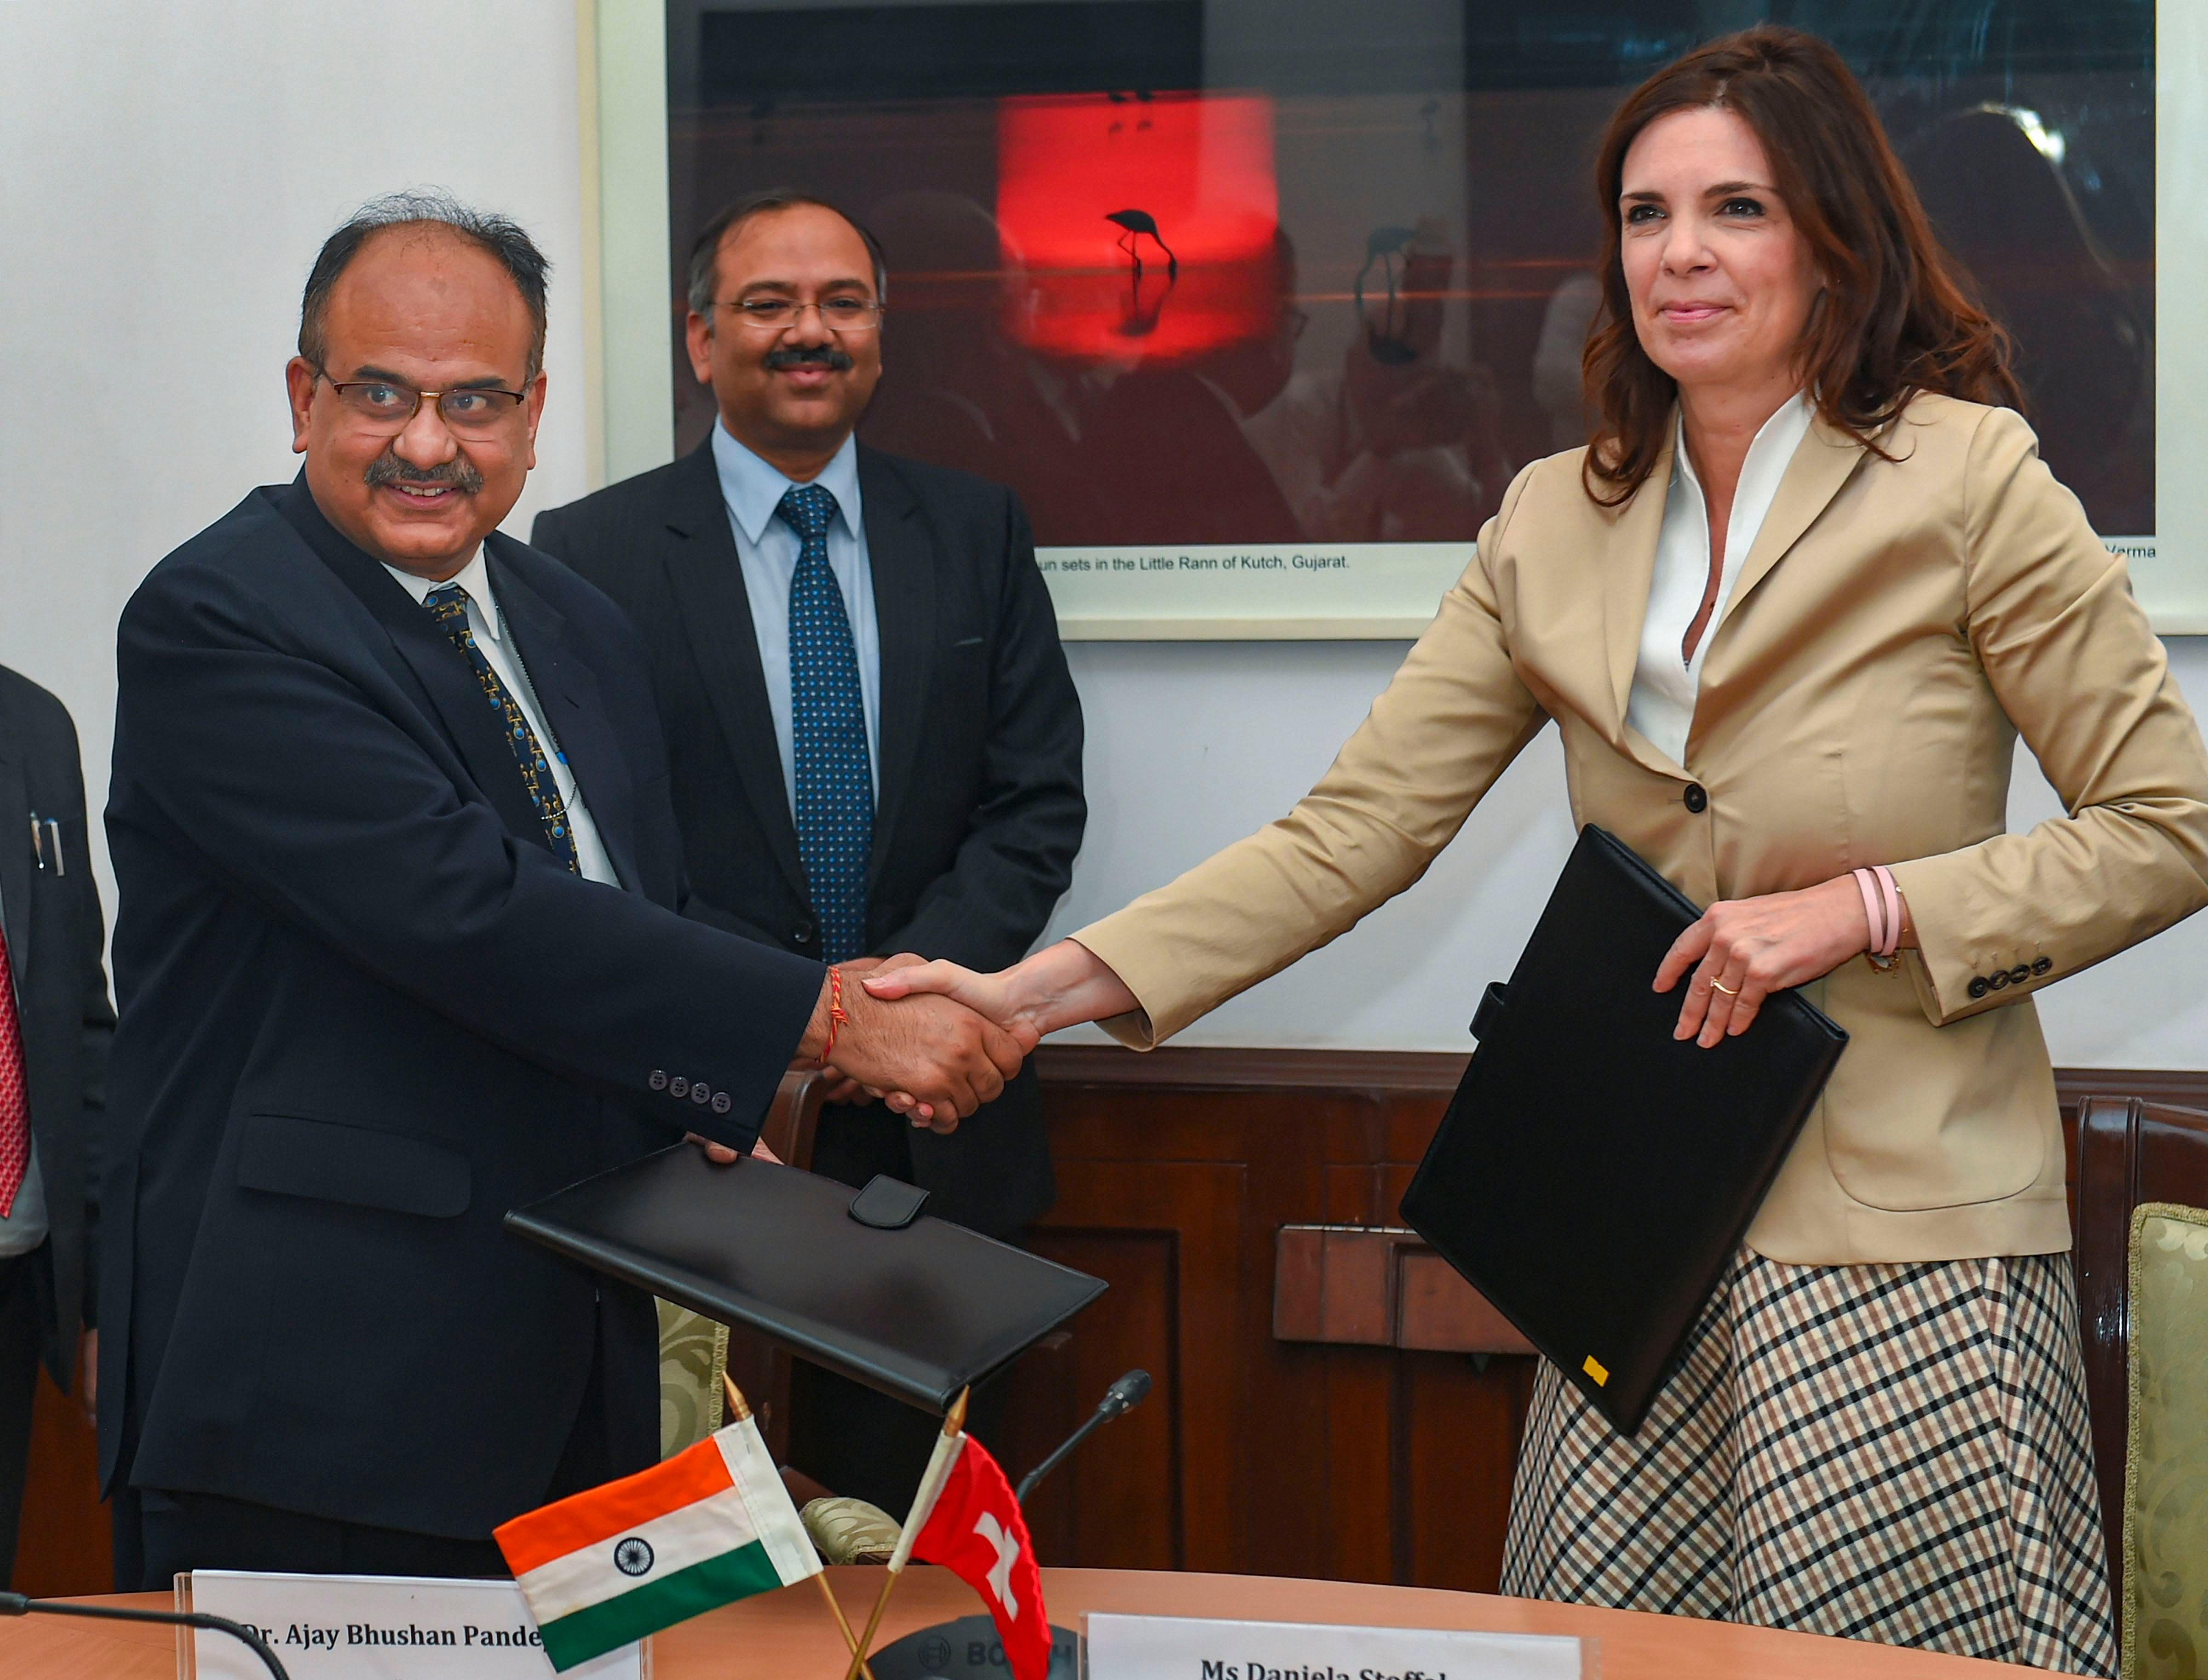 Revenue Secretary Ajay Bhushan Pandey shakes hands with Daniela Stoffel, Switzerland's State Secretary for International Finance, after signing the Secretary-level bilateral agreement between India and Switzerland. (PTI Photo)